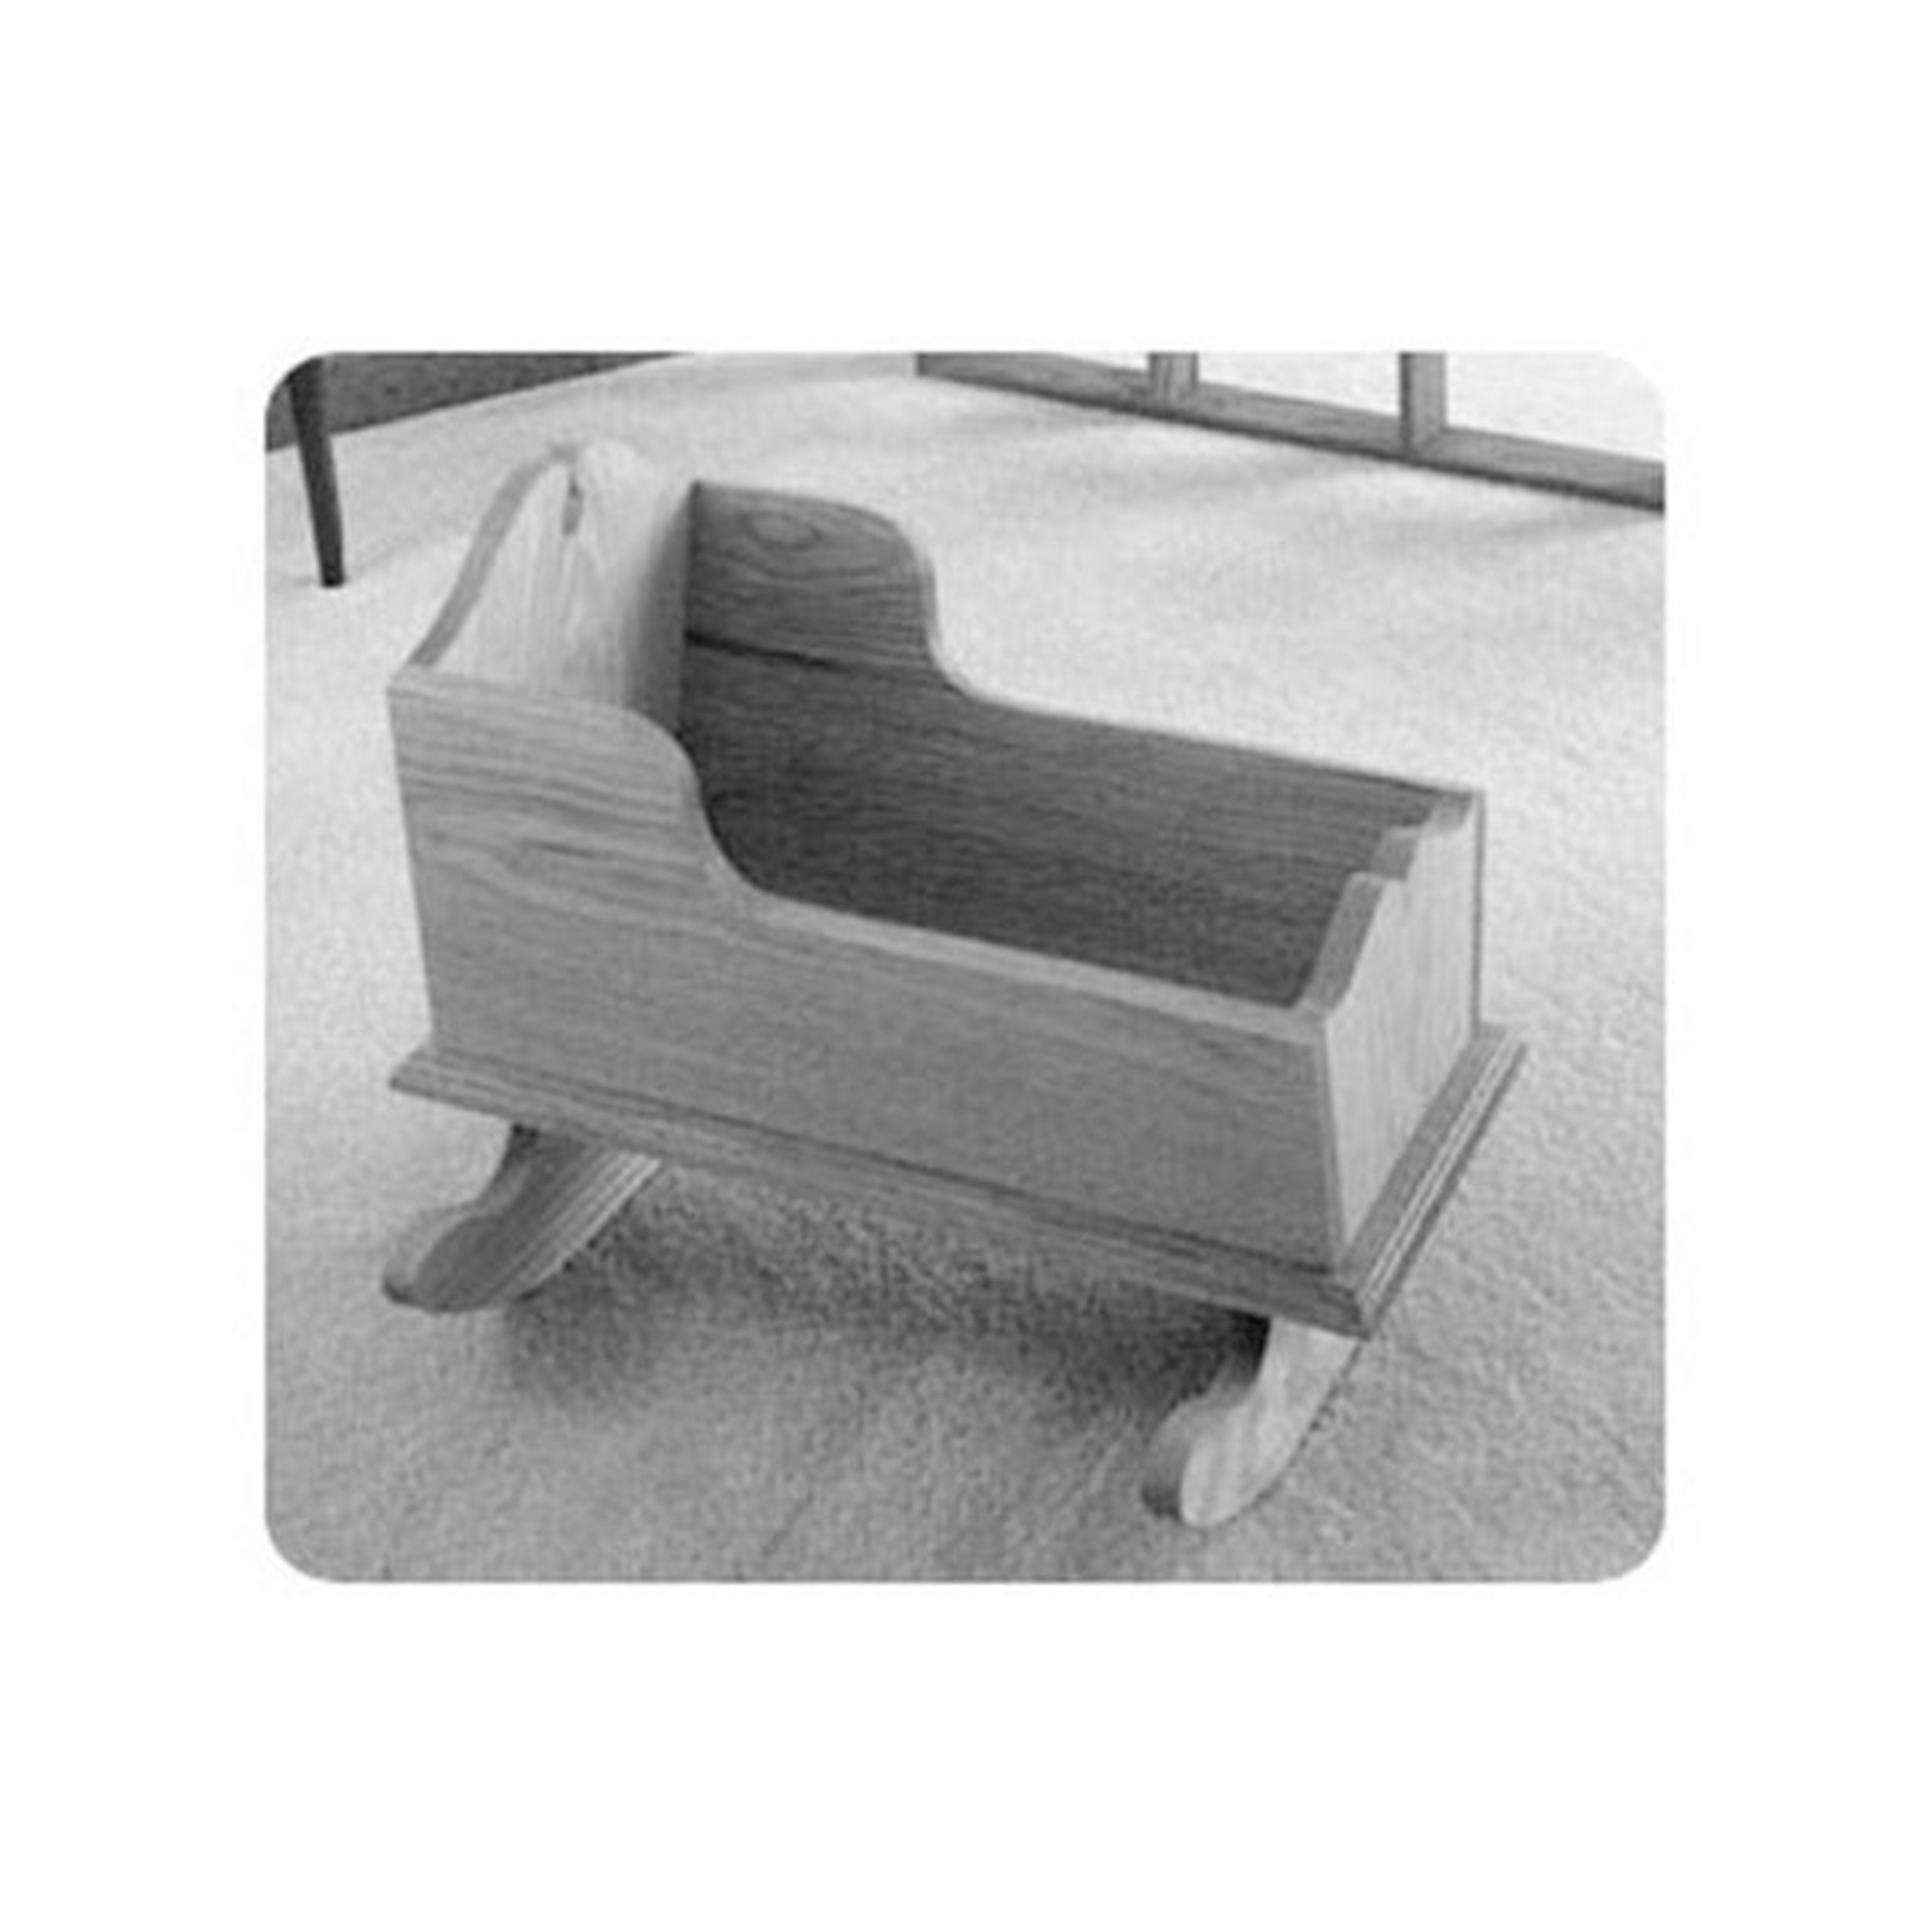 Woodworking Project Paper Plan To Build Easy Doll Cradle